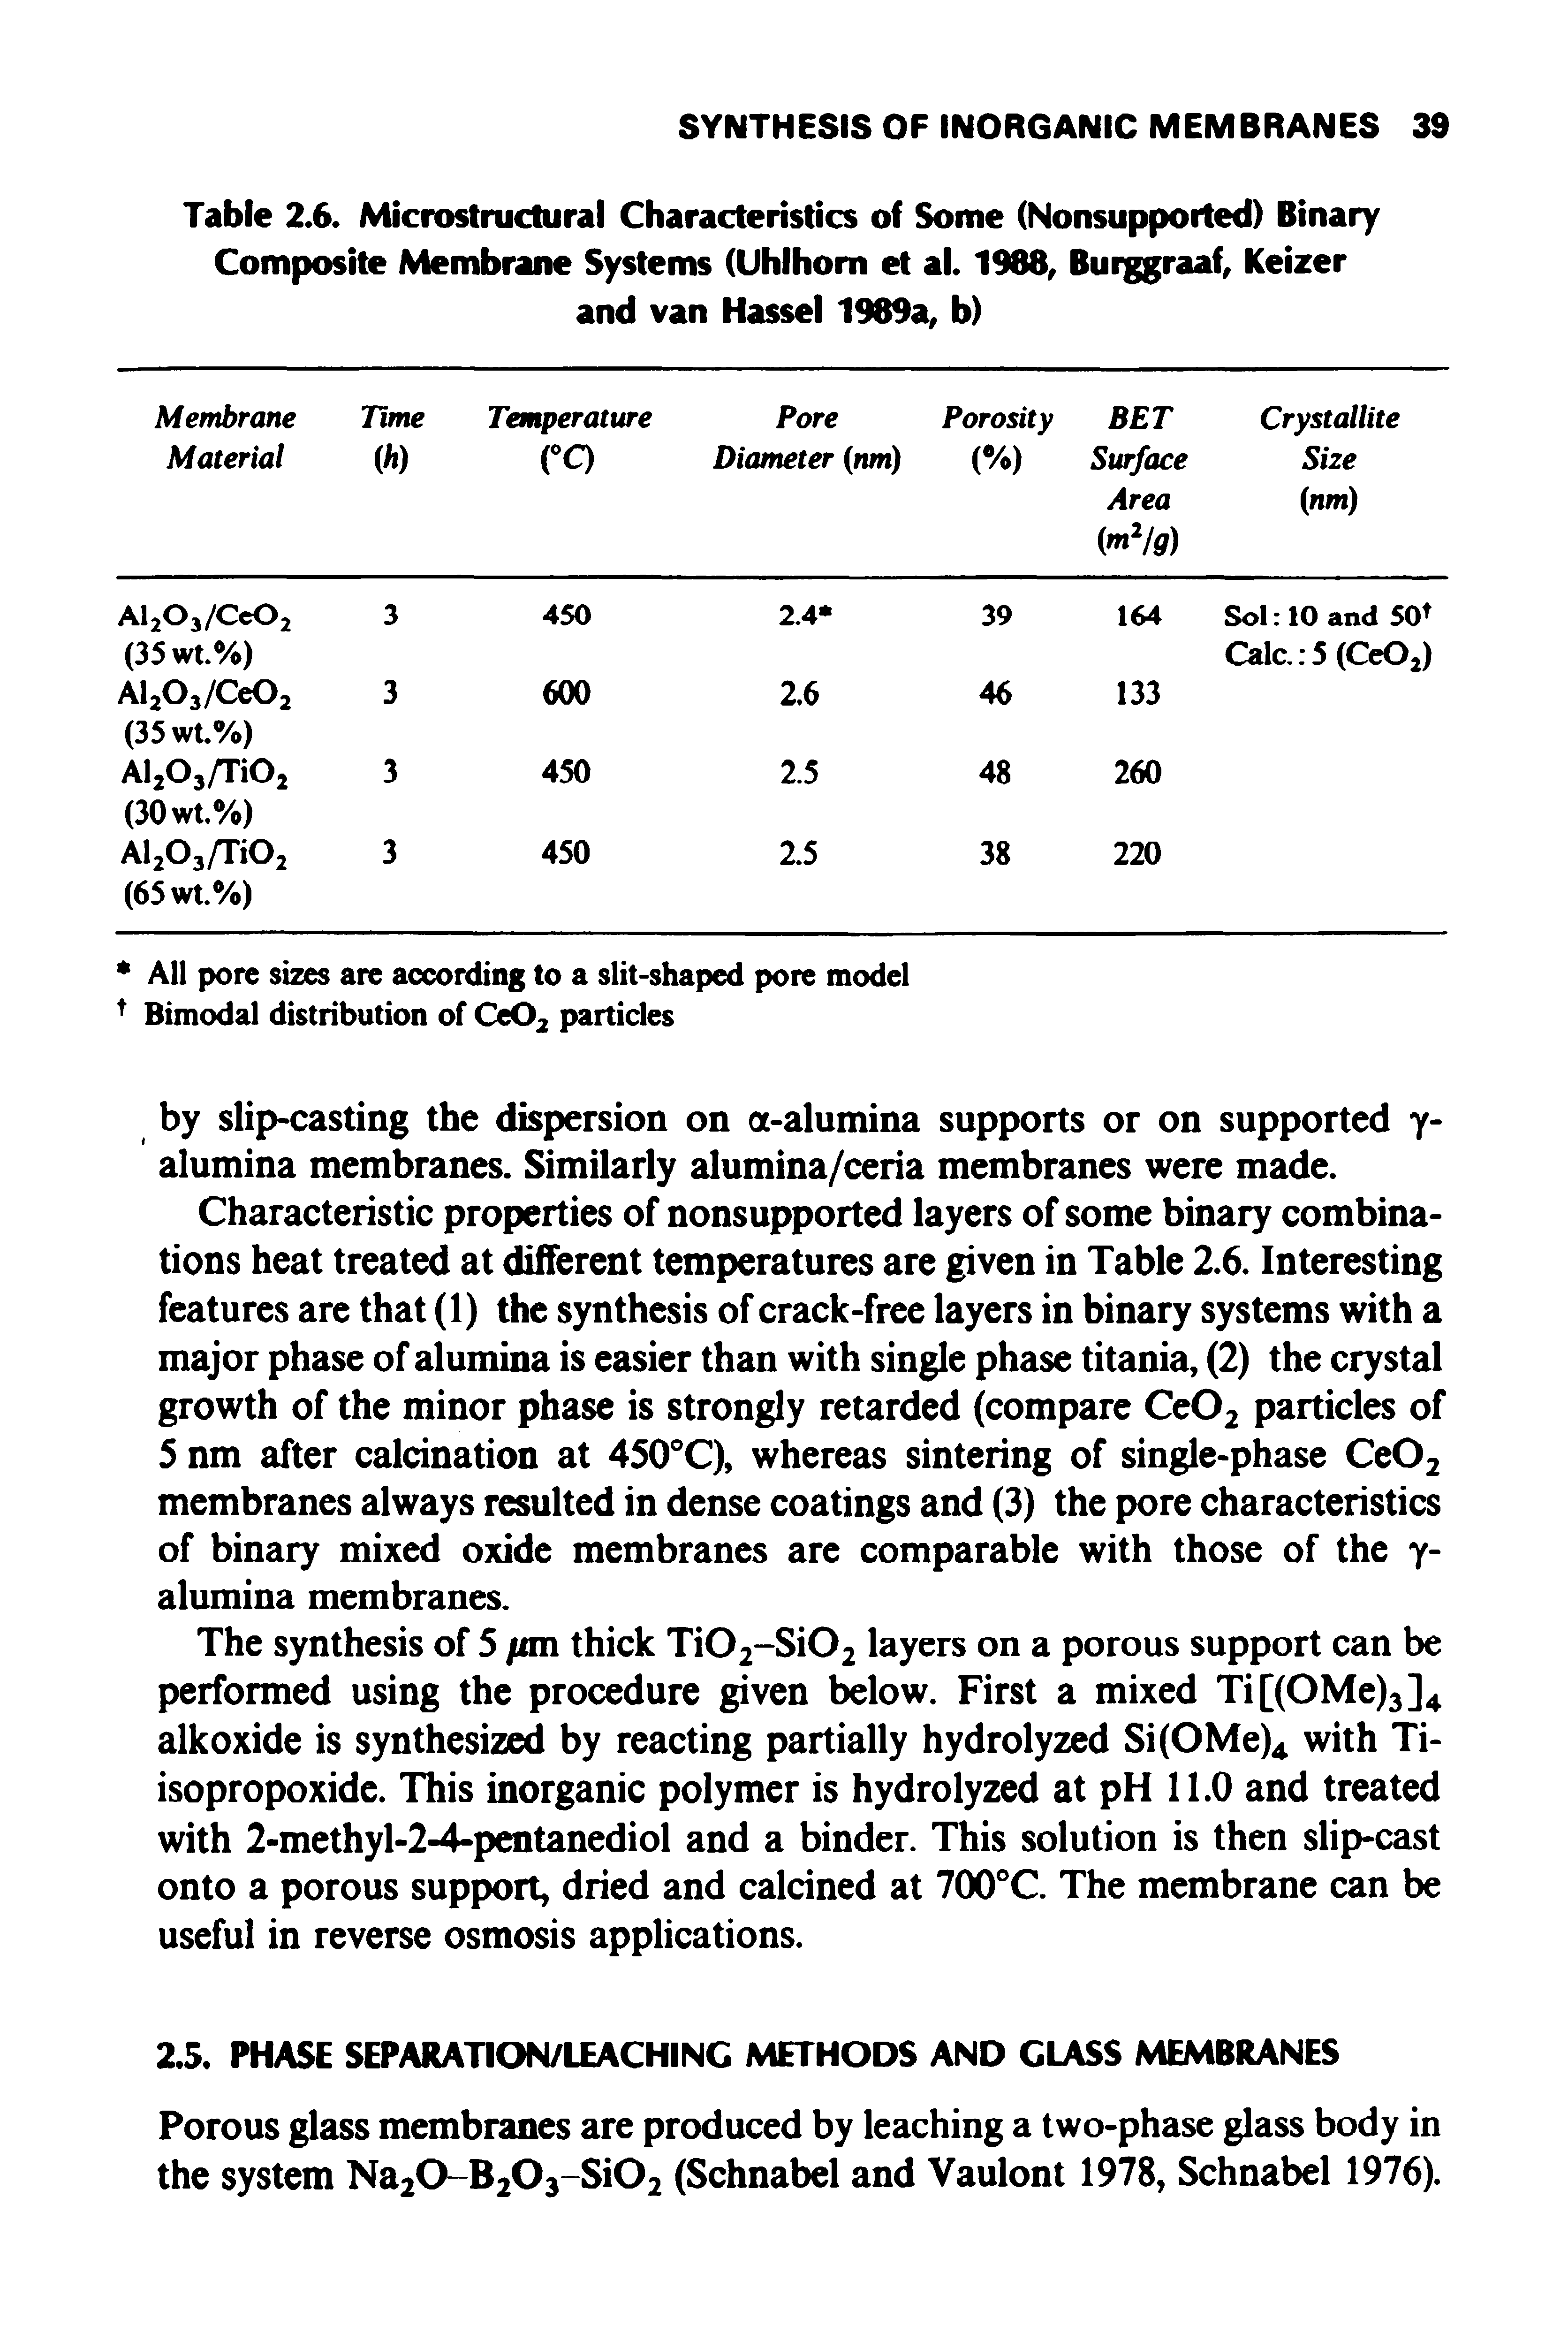 Table 2.6. Microstructural Characteristics of Some (Nonsupported) Binary Composite Membrane Systems (Uhlhom et al. 1988, Bui raaf, Keizer and van Hassel 1989a, b)...